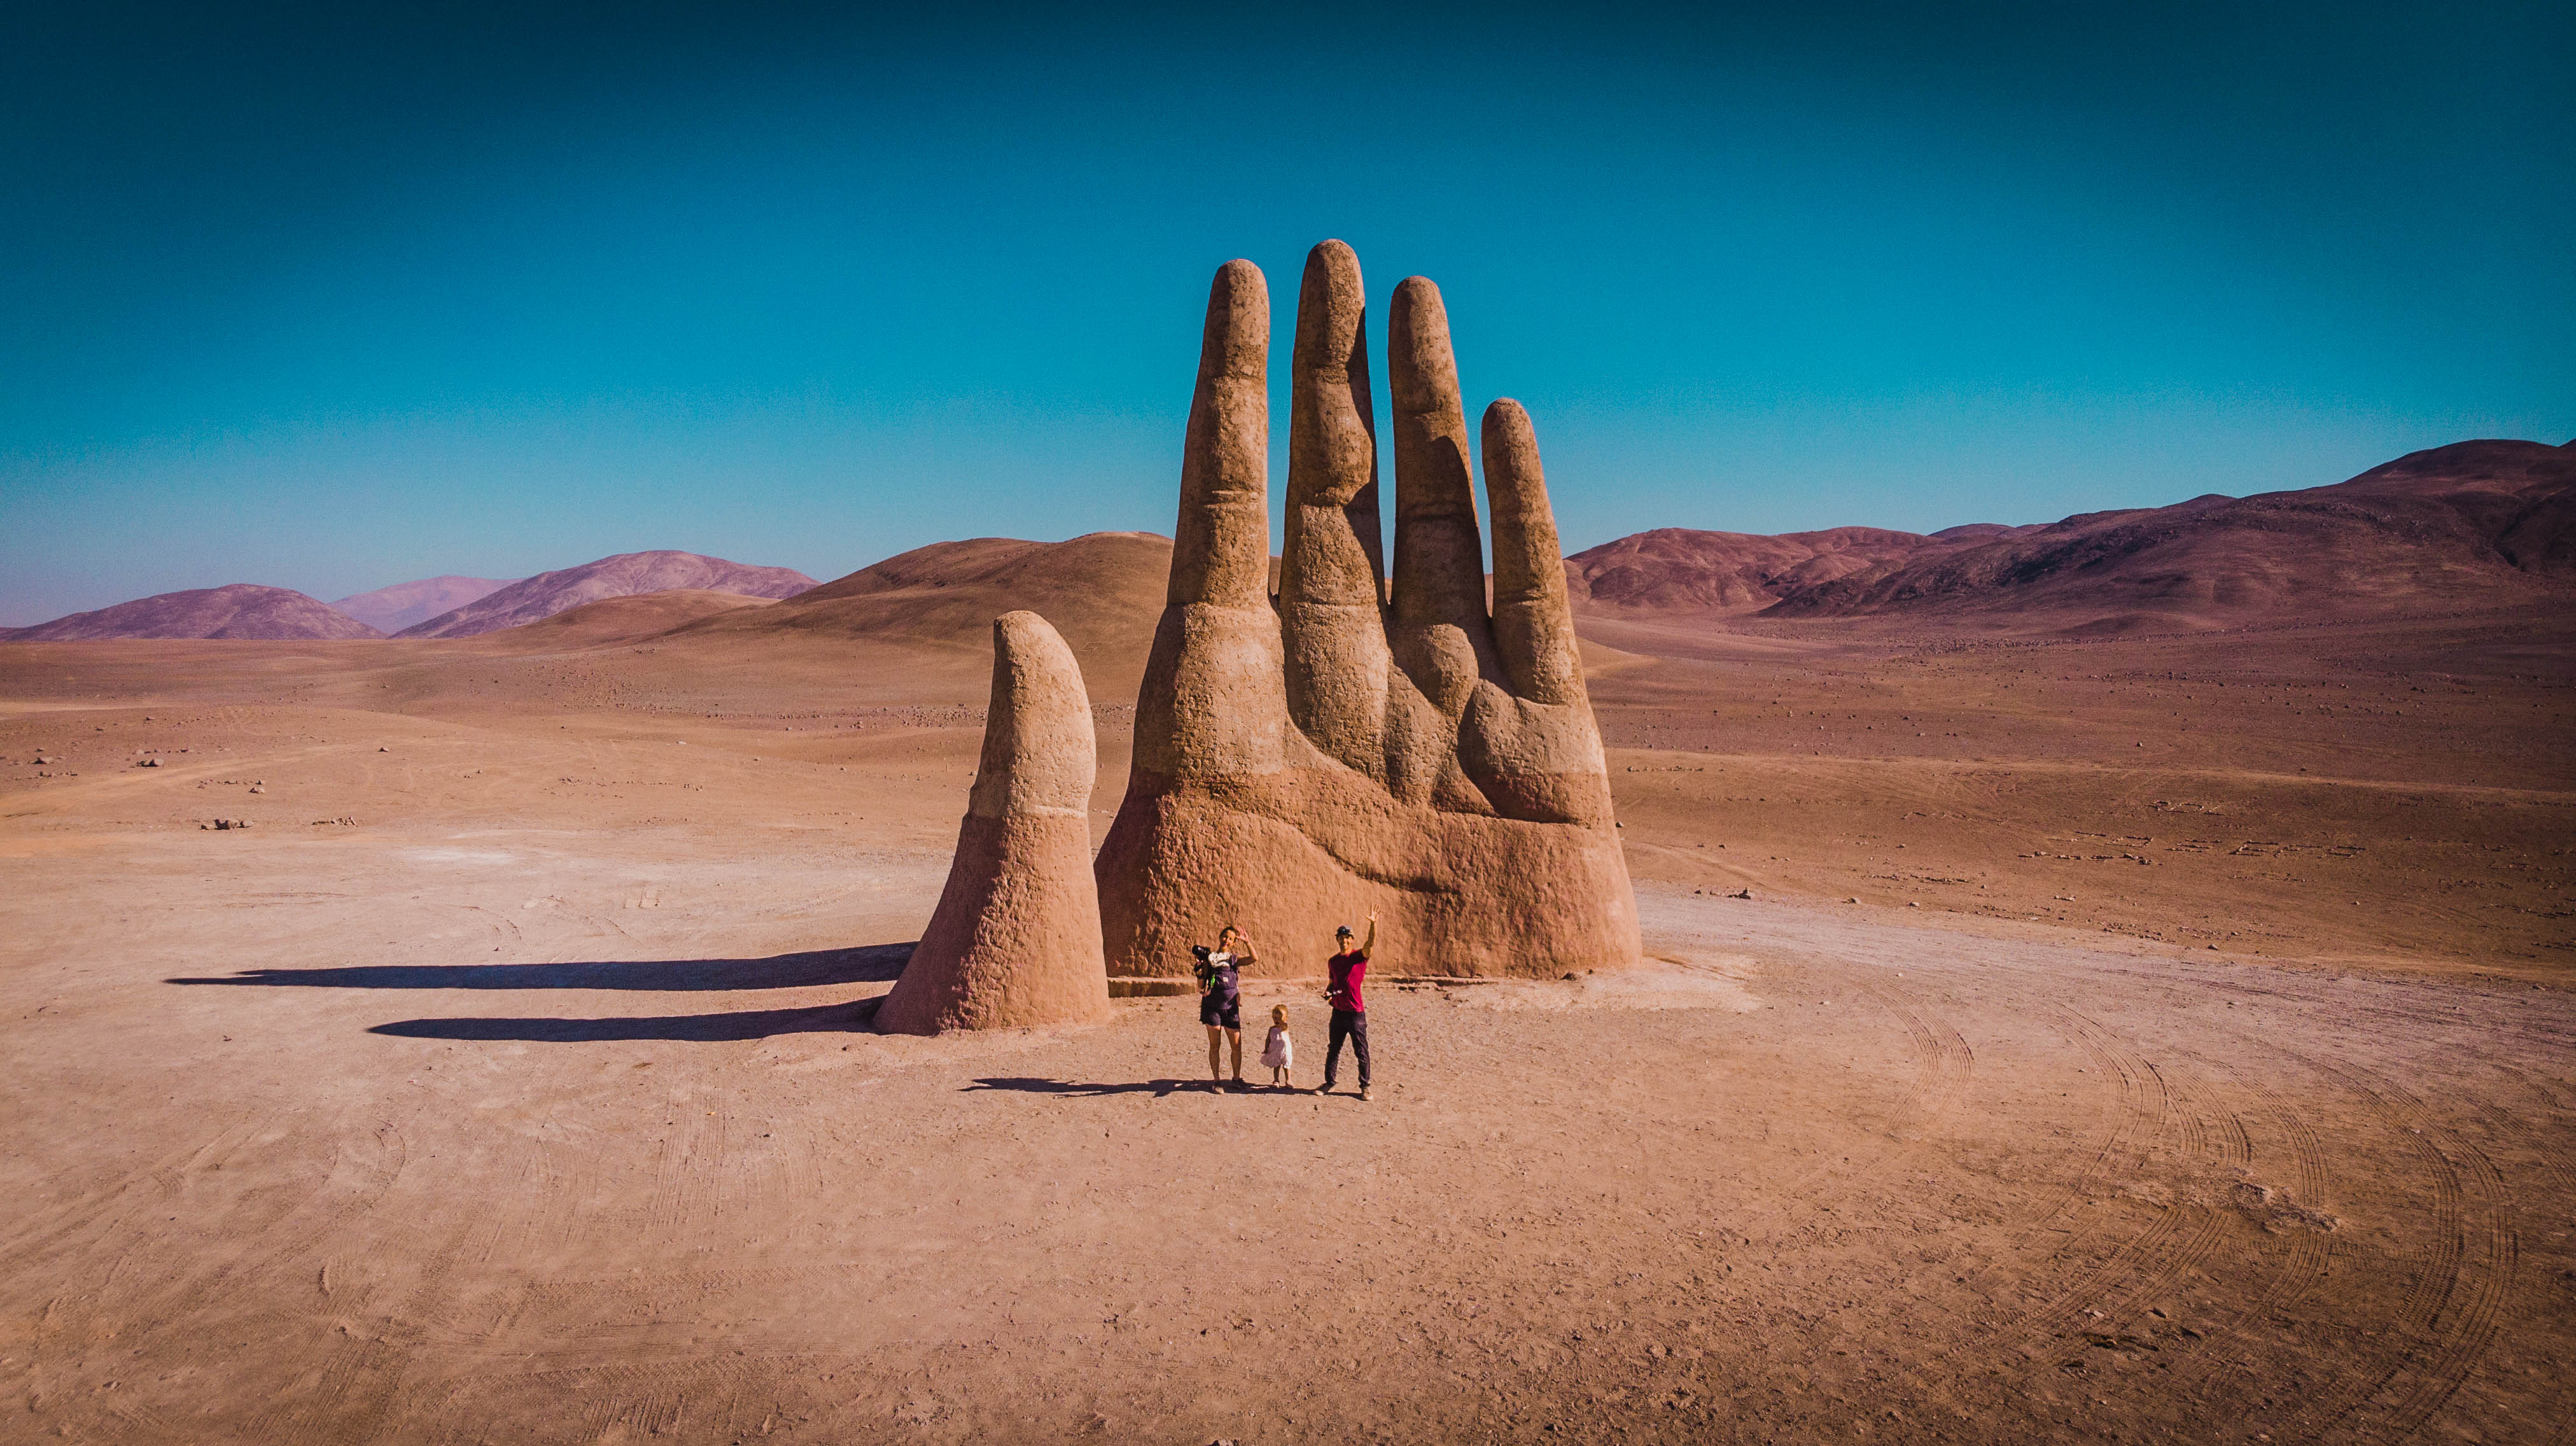 Drone shot of the Hand of the Desert